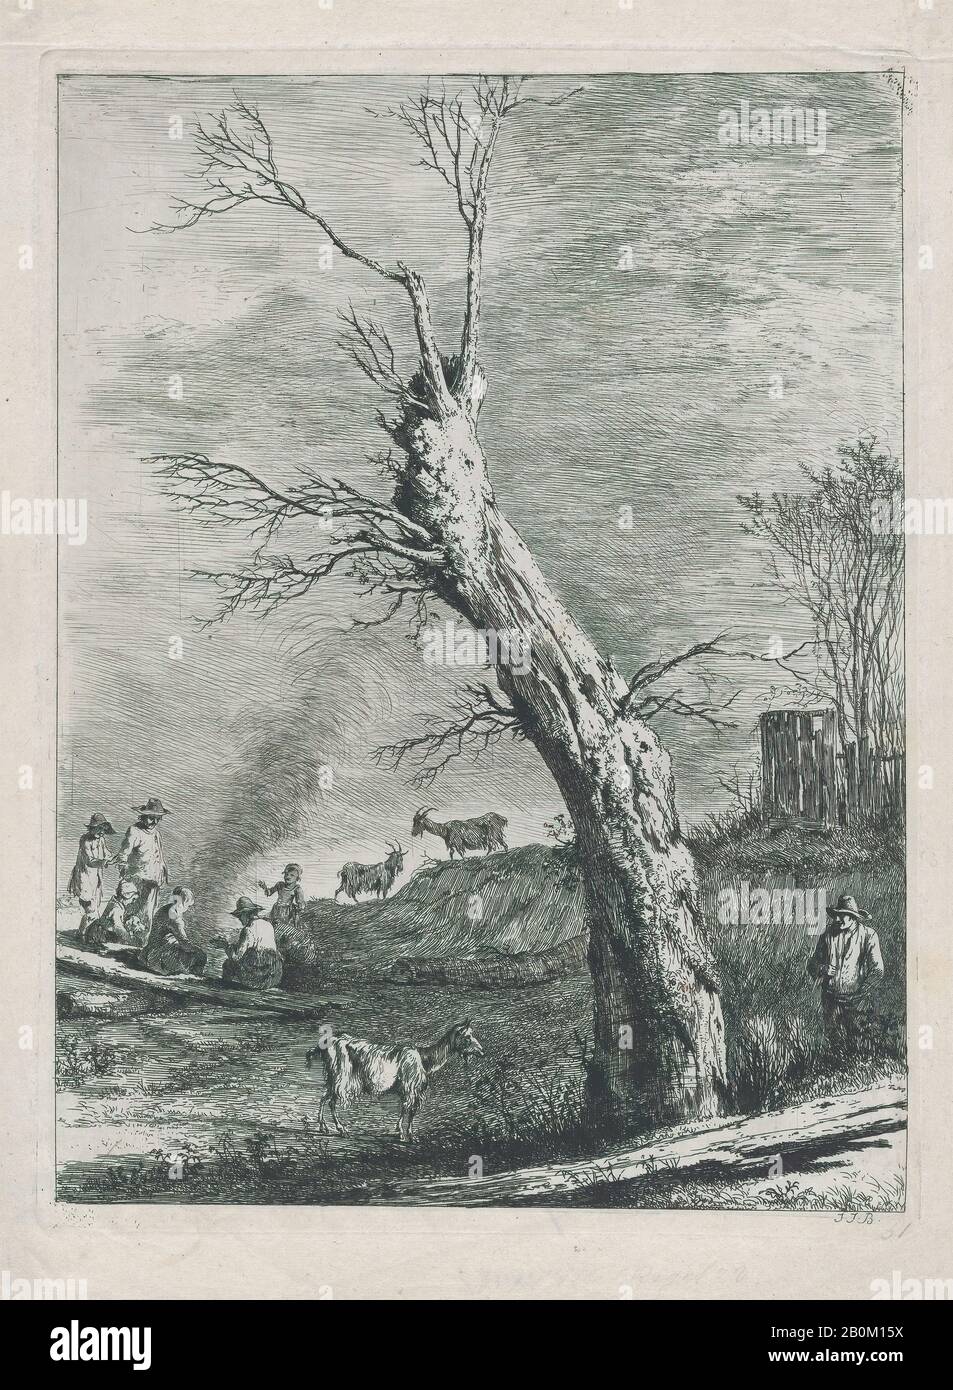 Jean Jacques de Boissieu, Winter, after a drawing completed in Saint-Chamond, Jean Jacques de Boissieu (French, Lyons 1736–1810 Lyons), 1795, Etching with drypoint and roulette; fourth state of four, Sheet: 11 5/8 x 8 9/16 in. (29.6 x 21.7 cm), Plate: 10 7/16 x 7 13/16 in. (26.5 x 19.8 cm), Prints Stock Photo